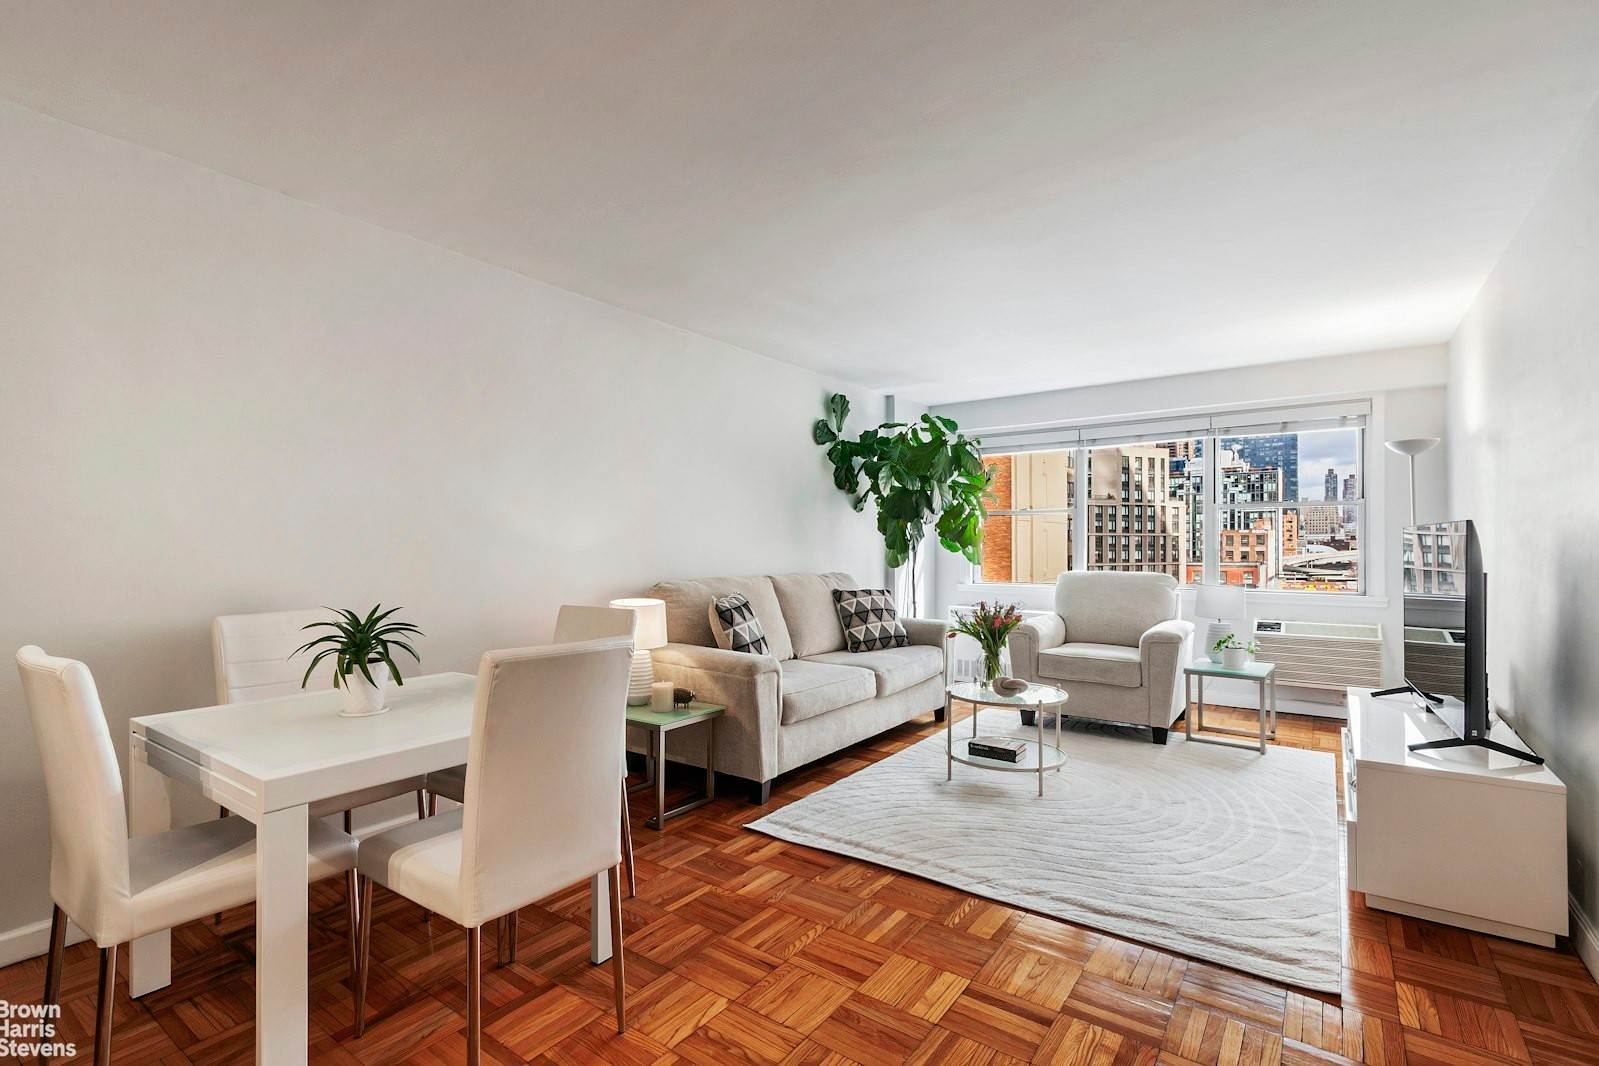 Cooperative for Sale at Hudson Yards, Manhattan, NY 10001